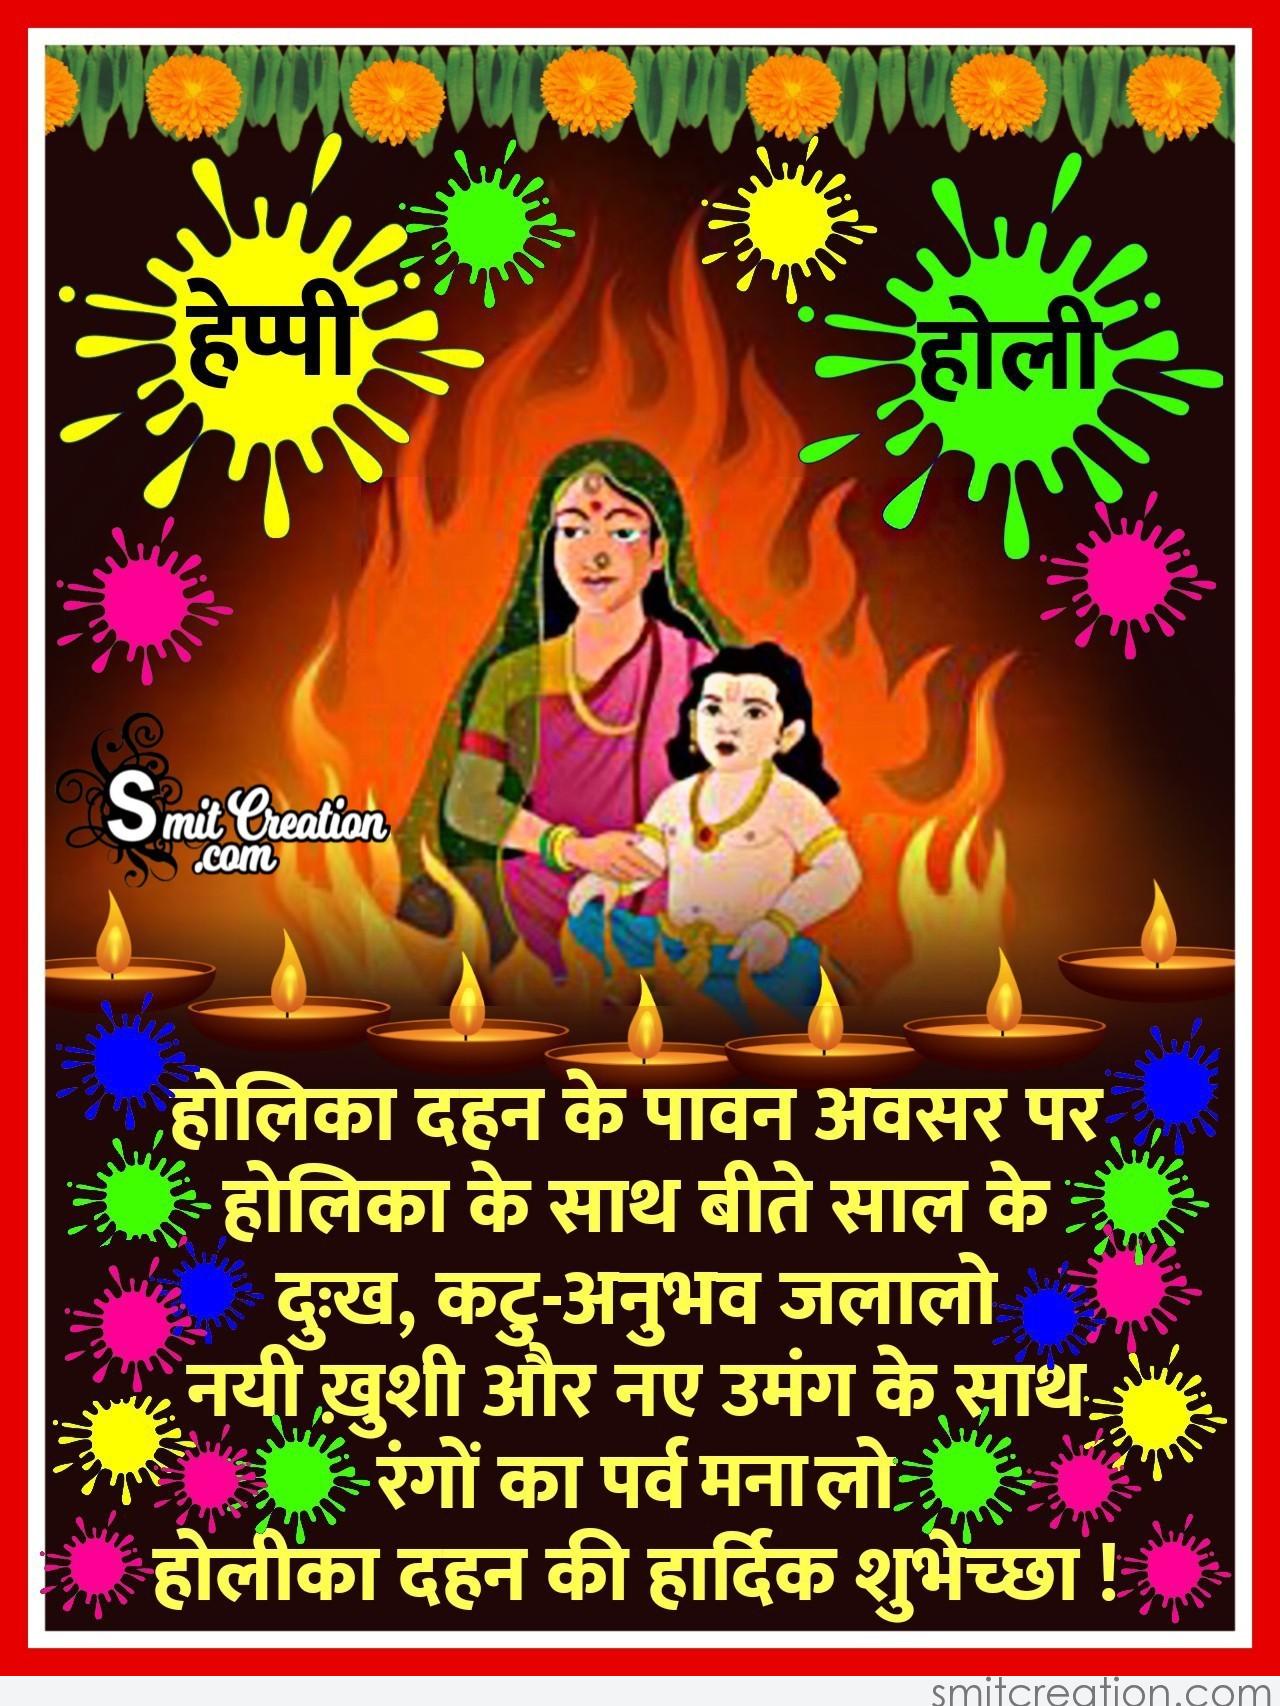 20+ Holika Dahan - Pictures and Graphics for different festivals